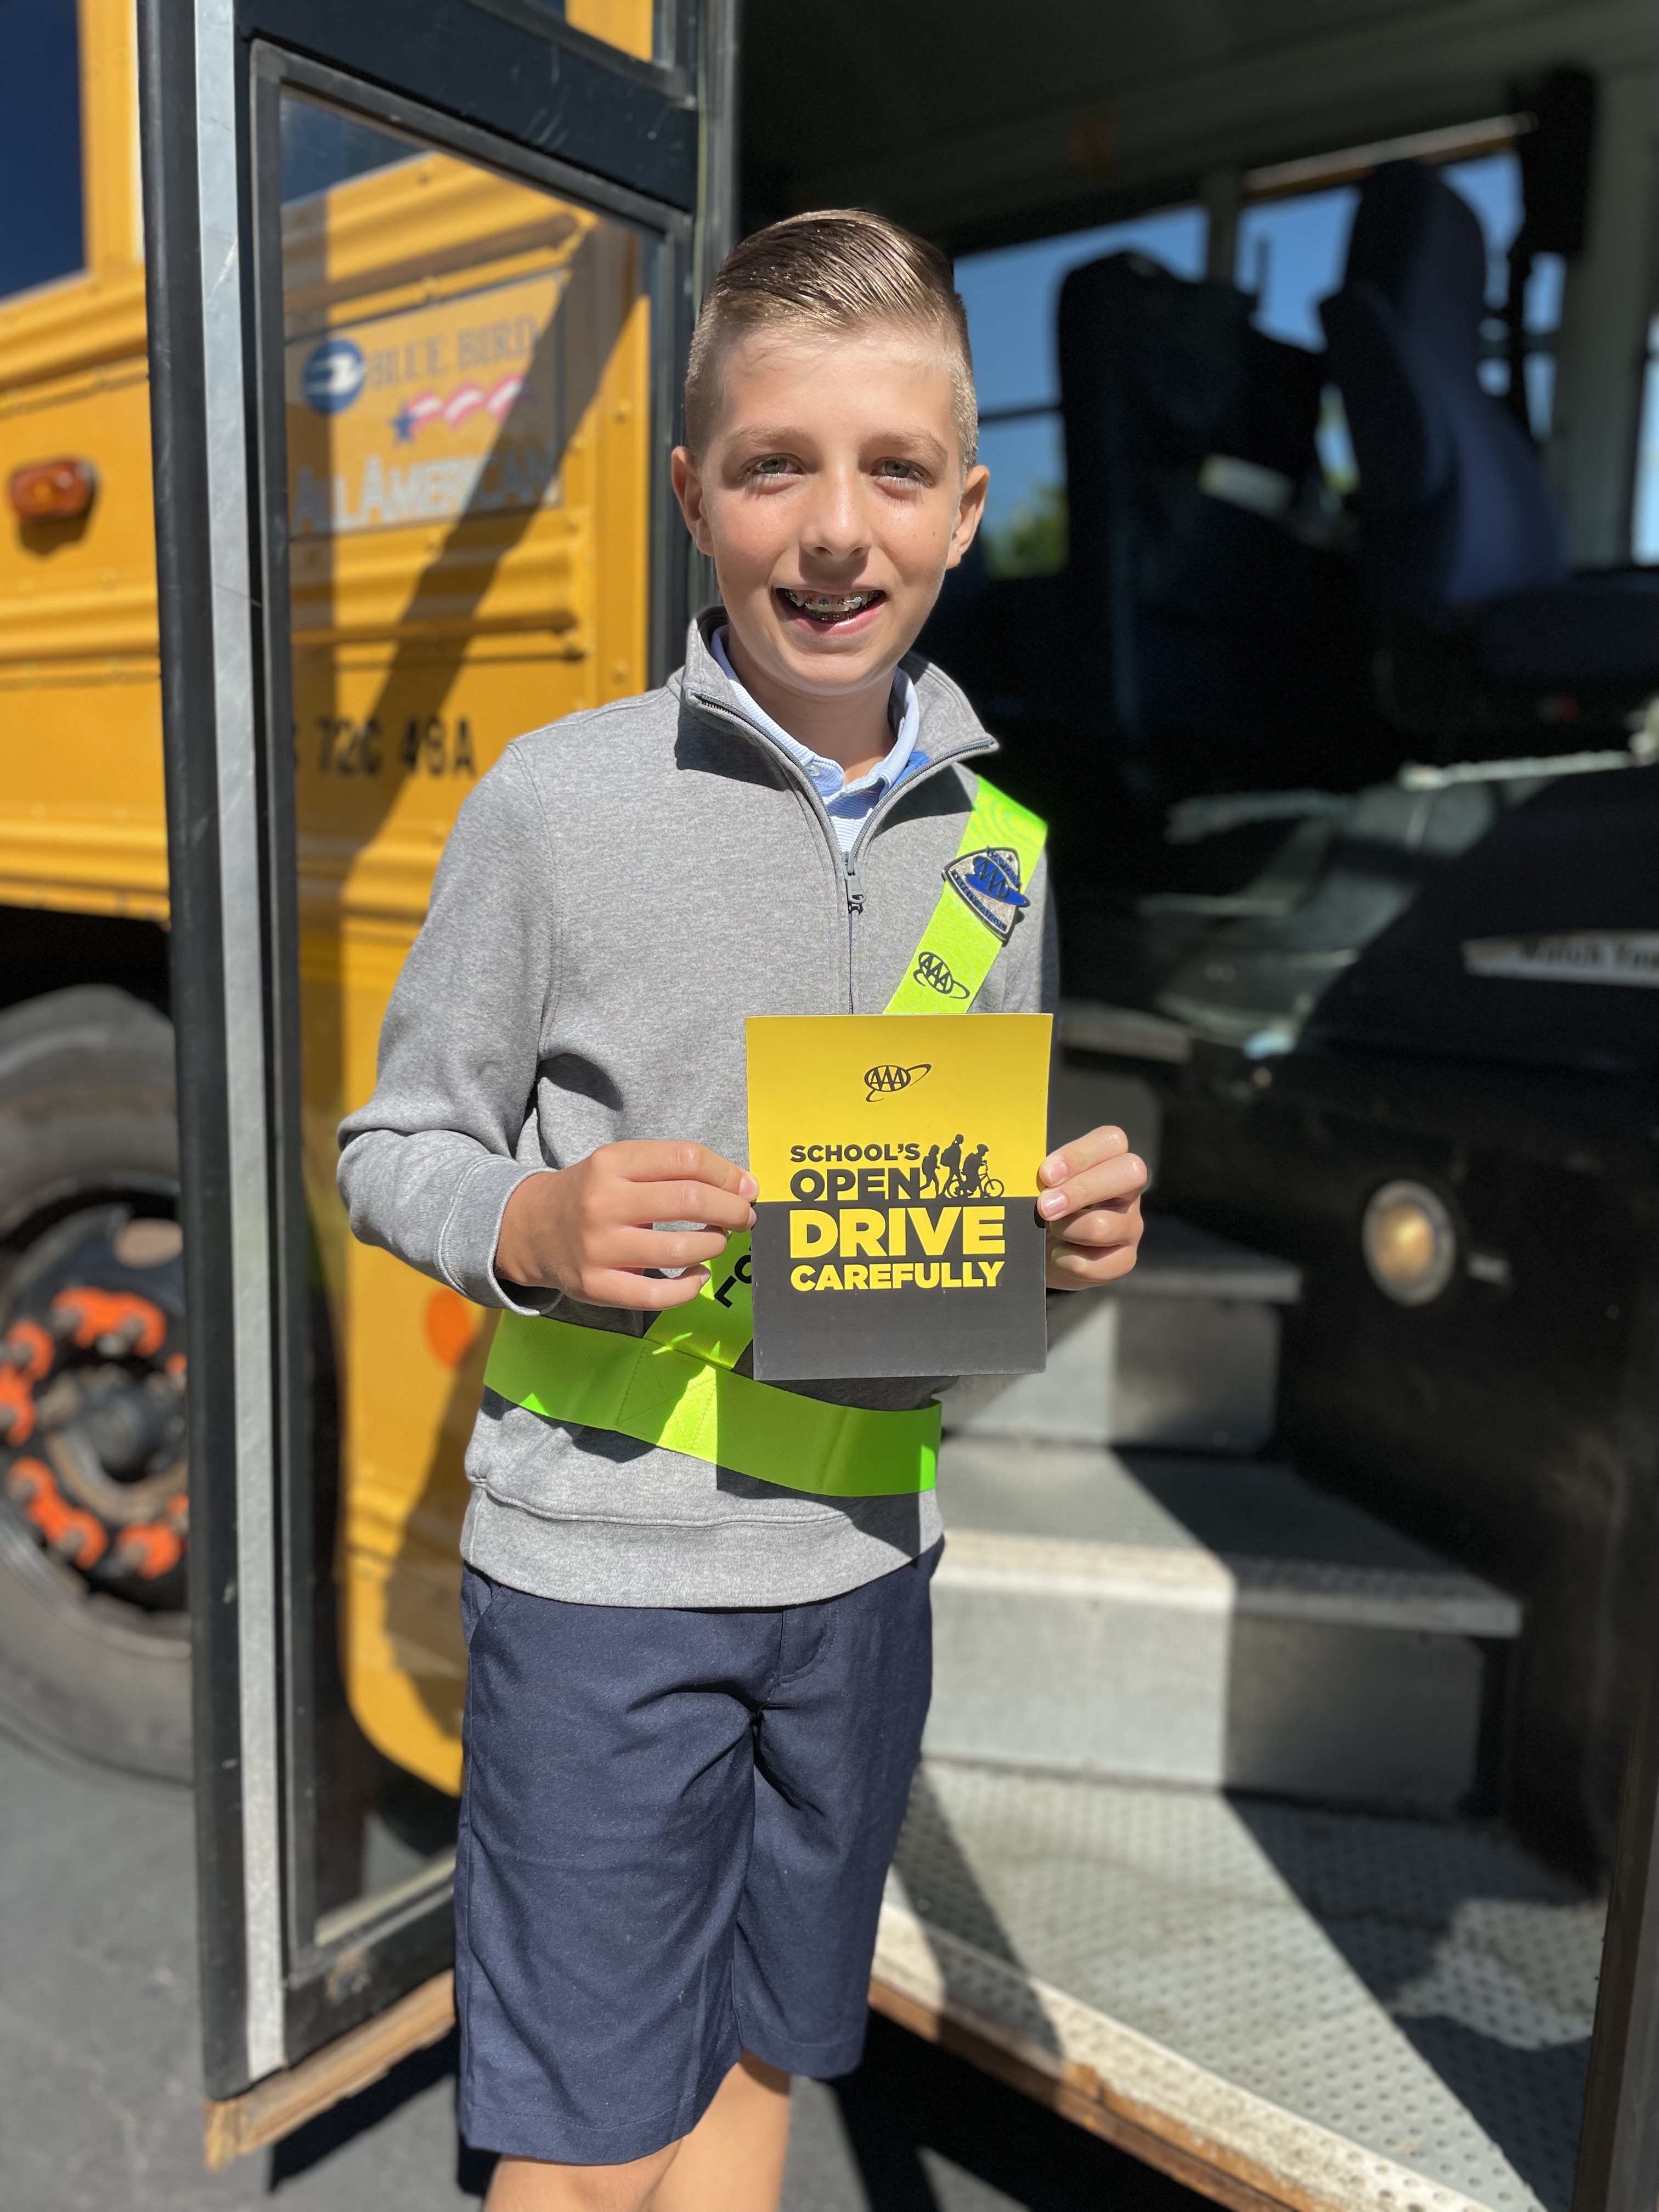 AAA School Safety Patroller  boards a school bus and poses with a School's Open, Drive Carefully magnet